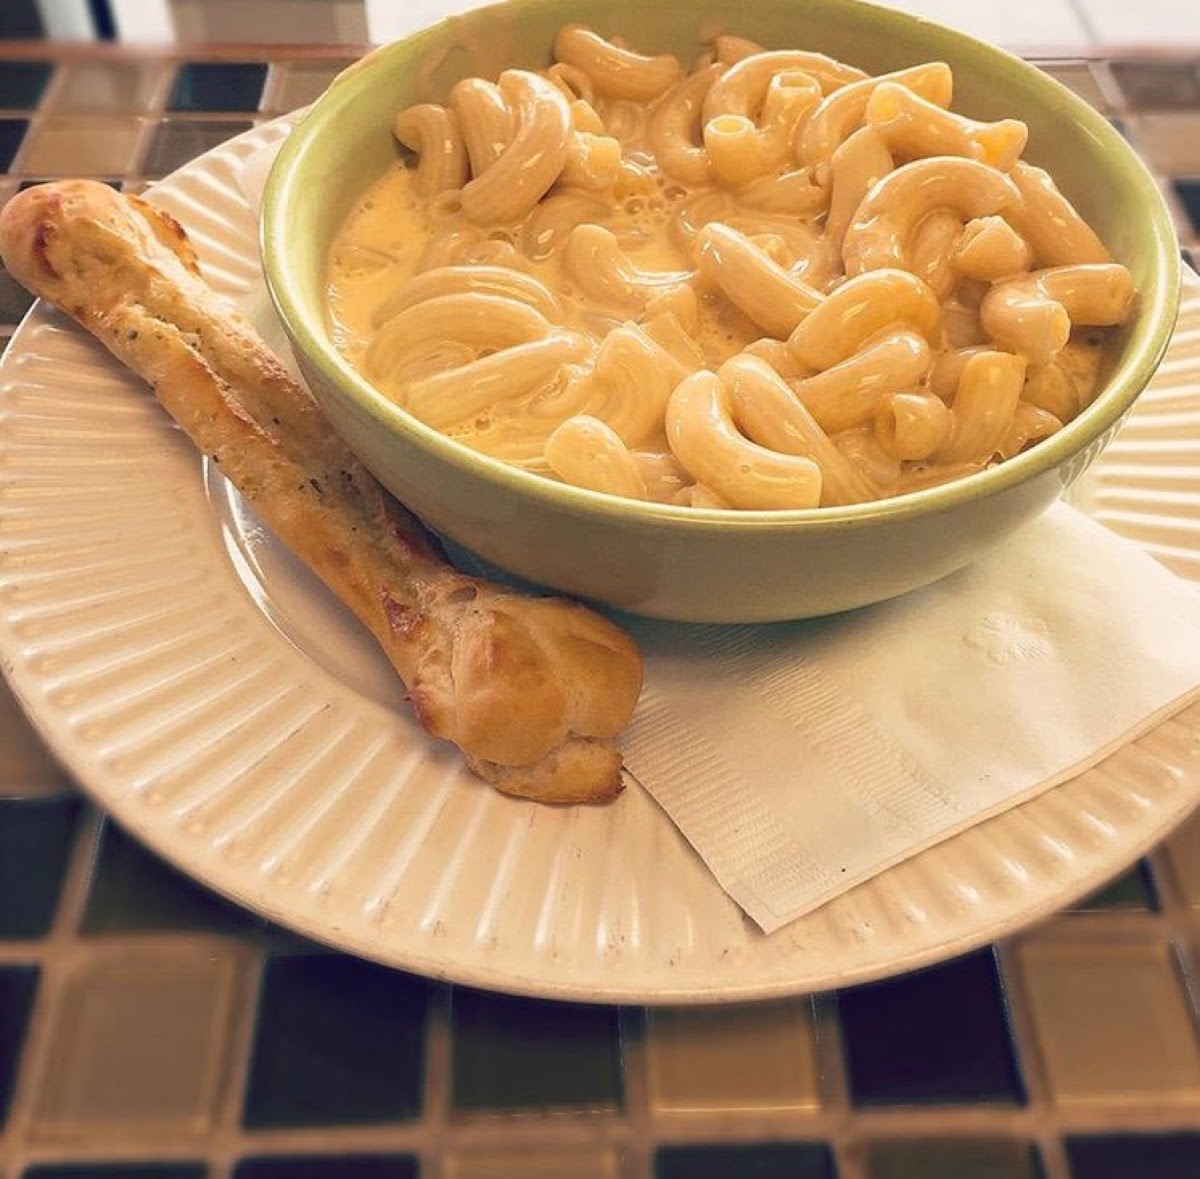 Super creamy mac n cheese with a soft breadstick 👌🏼